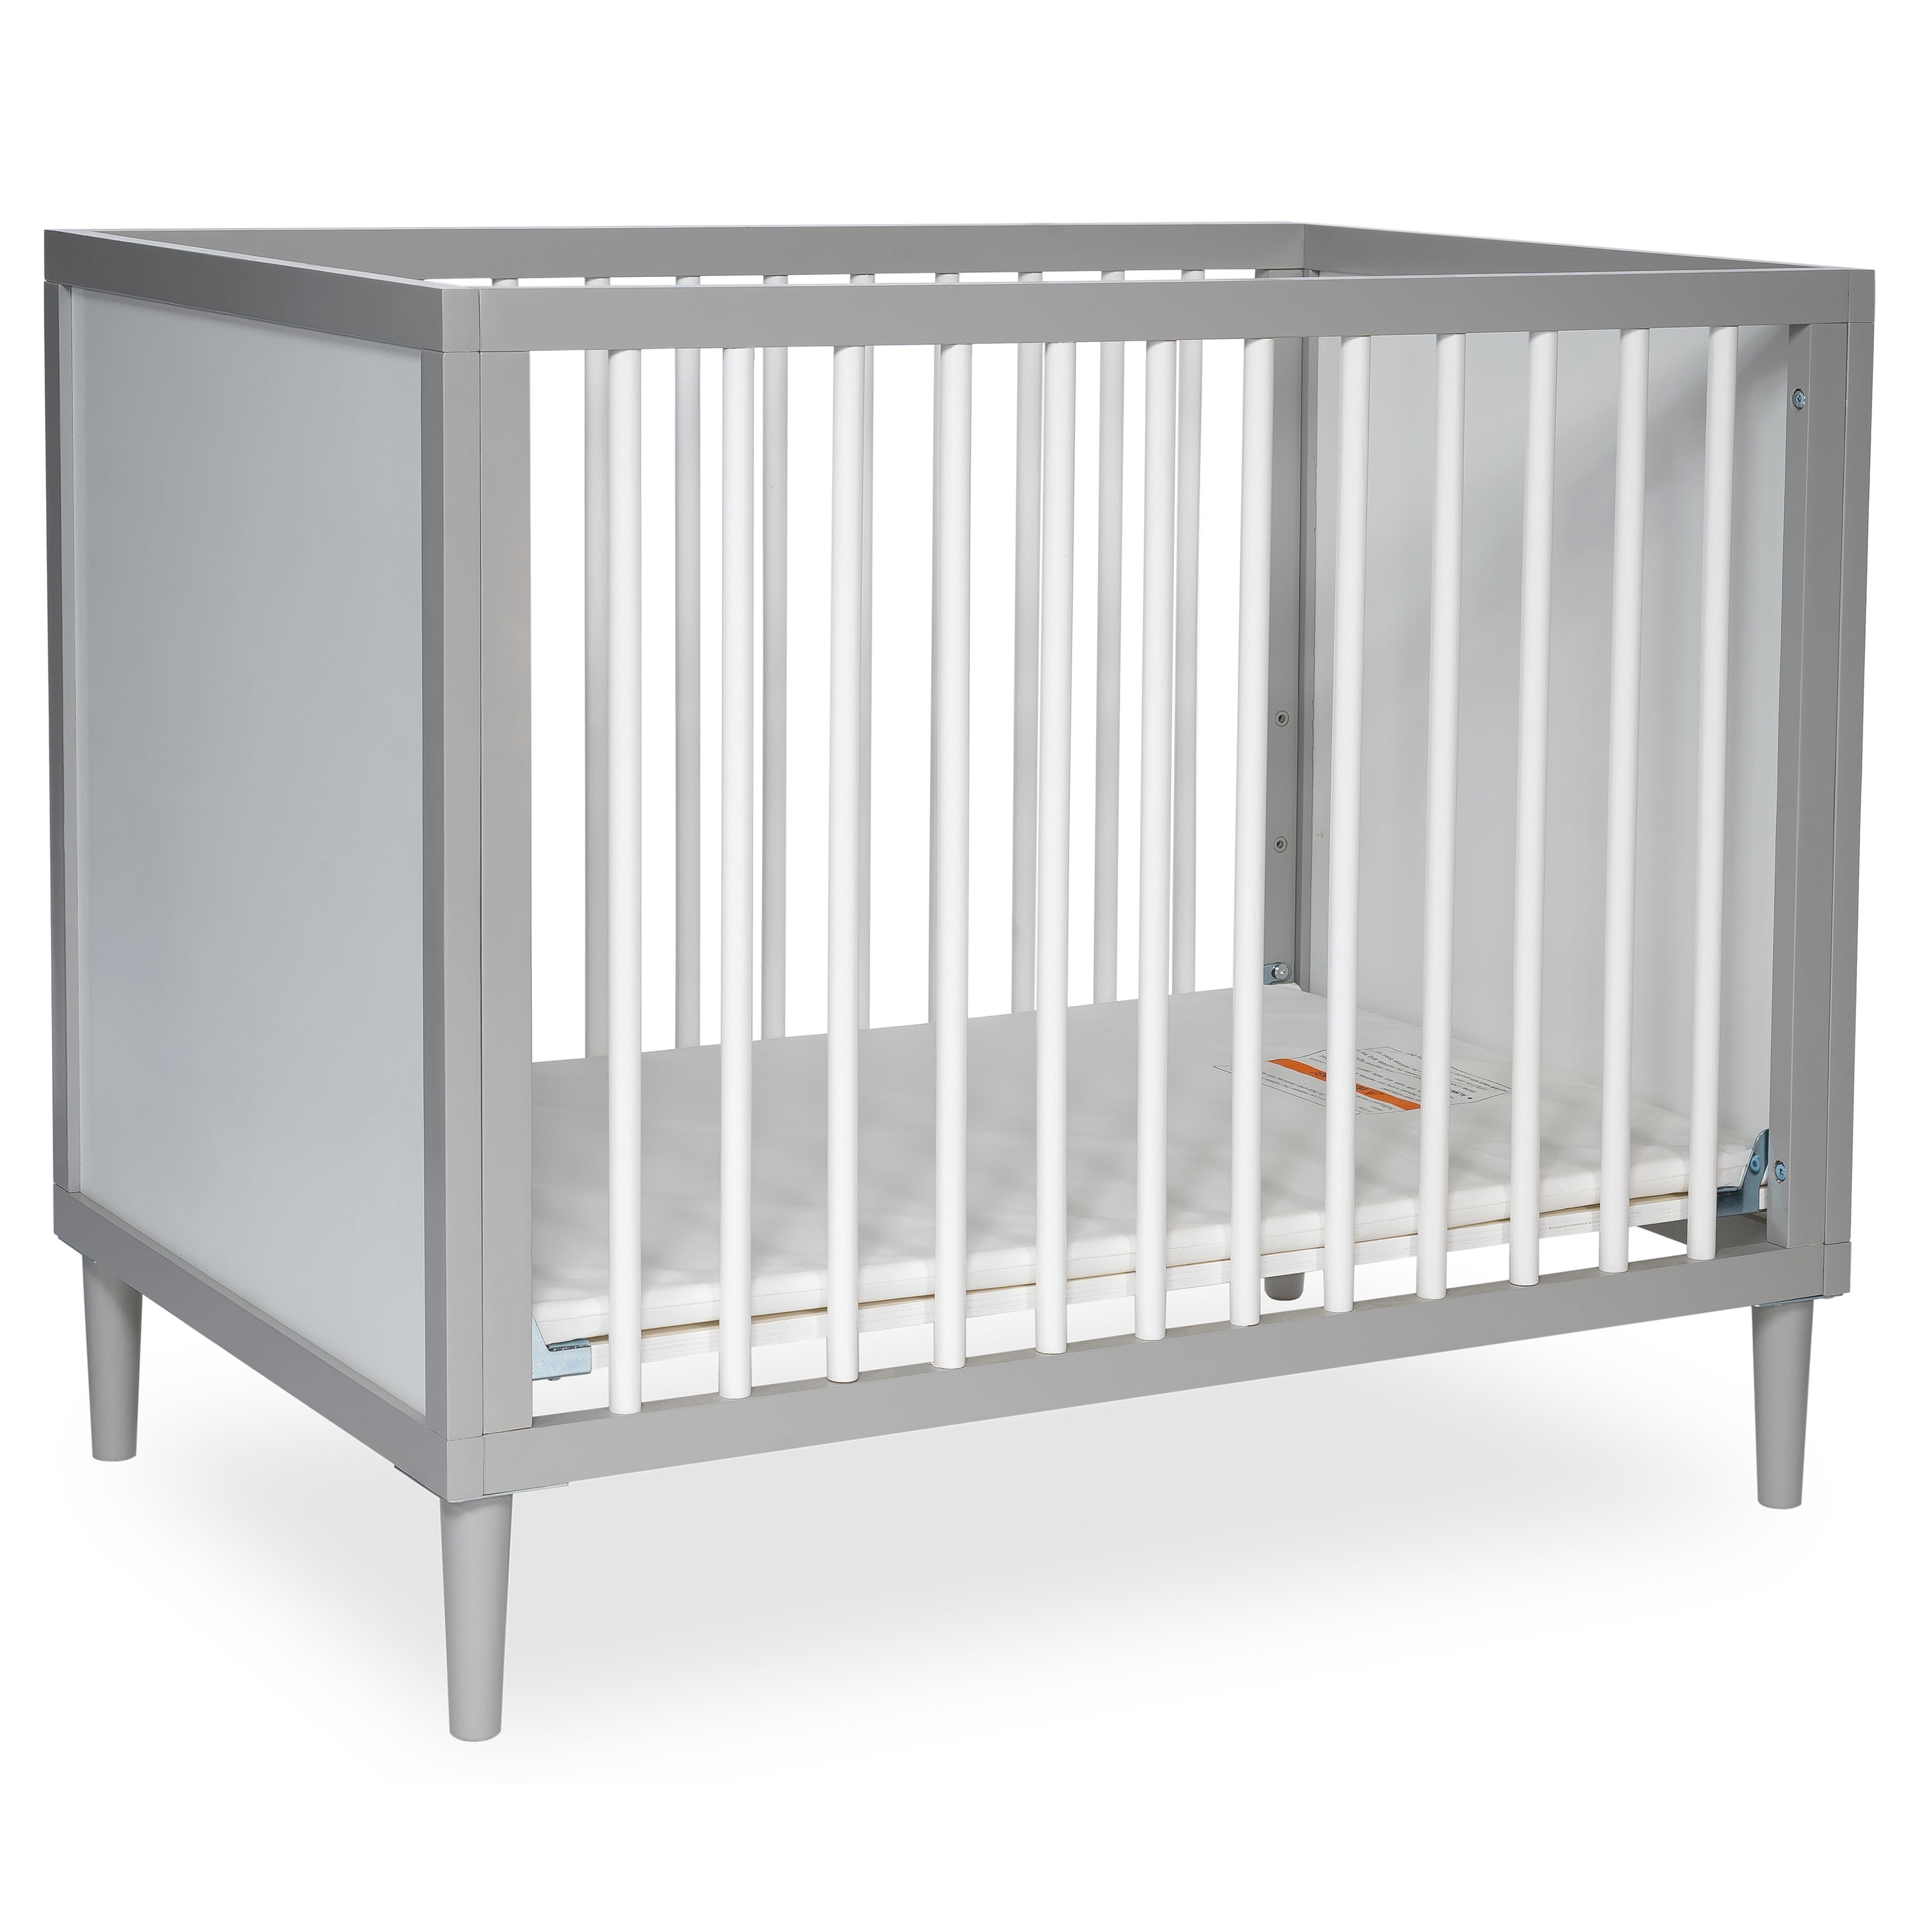 Century Meets Modern I Portable Crib Dream On Me Lucas Mini Modern Crib with Rounded Spindles I Convertible Crib I Mid 